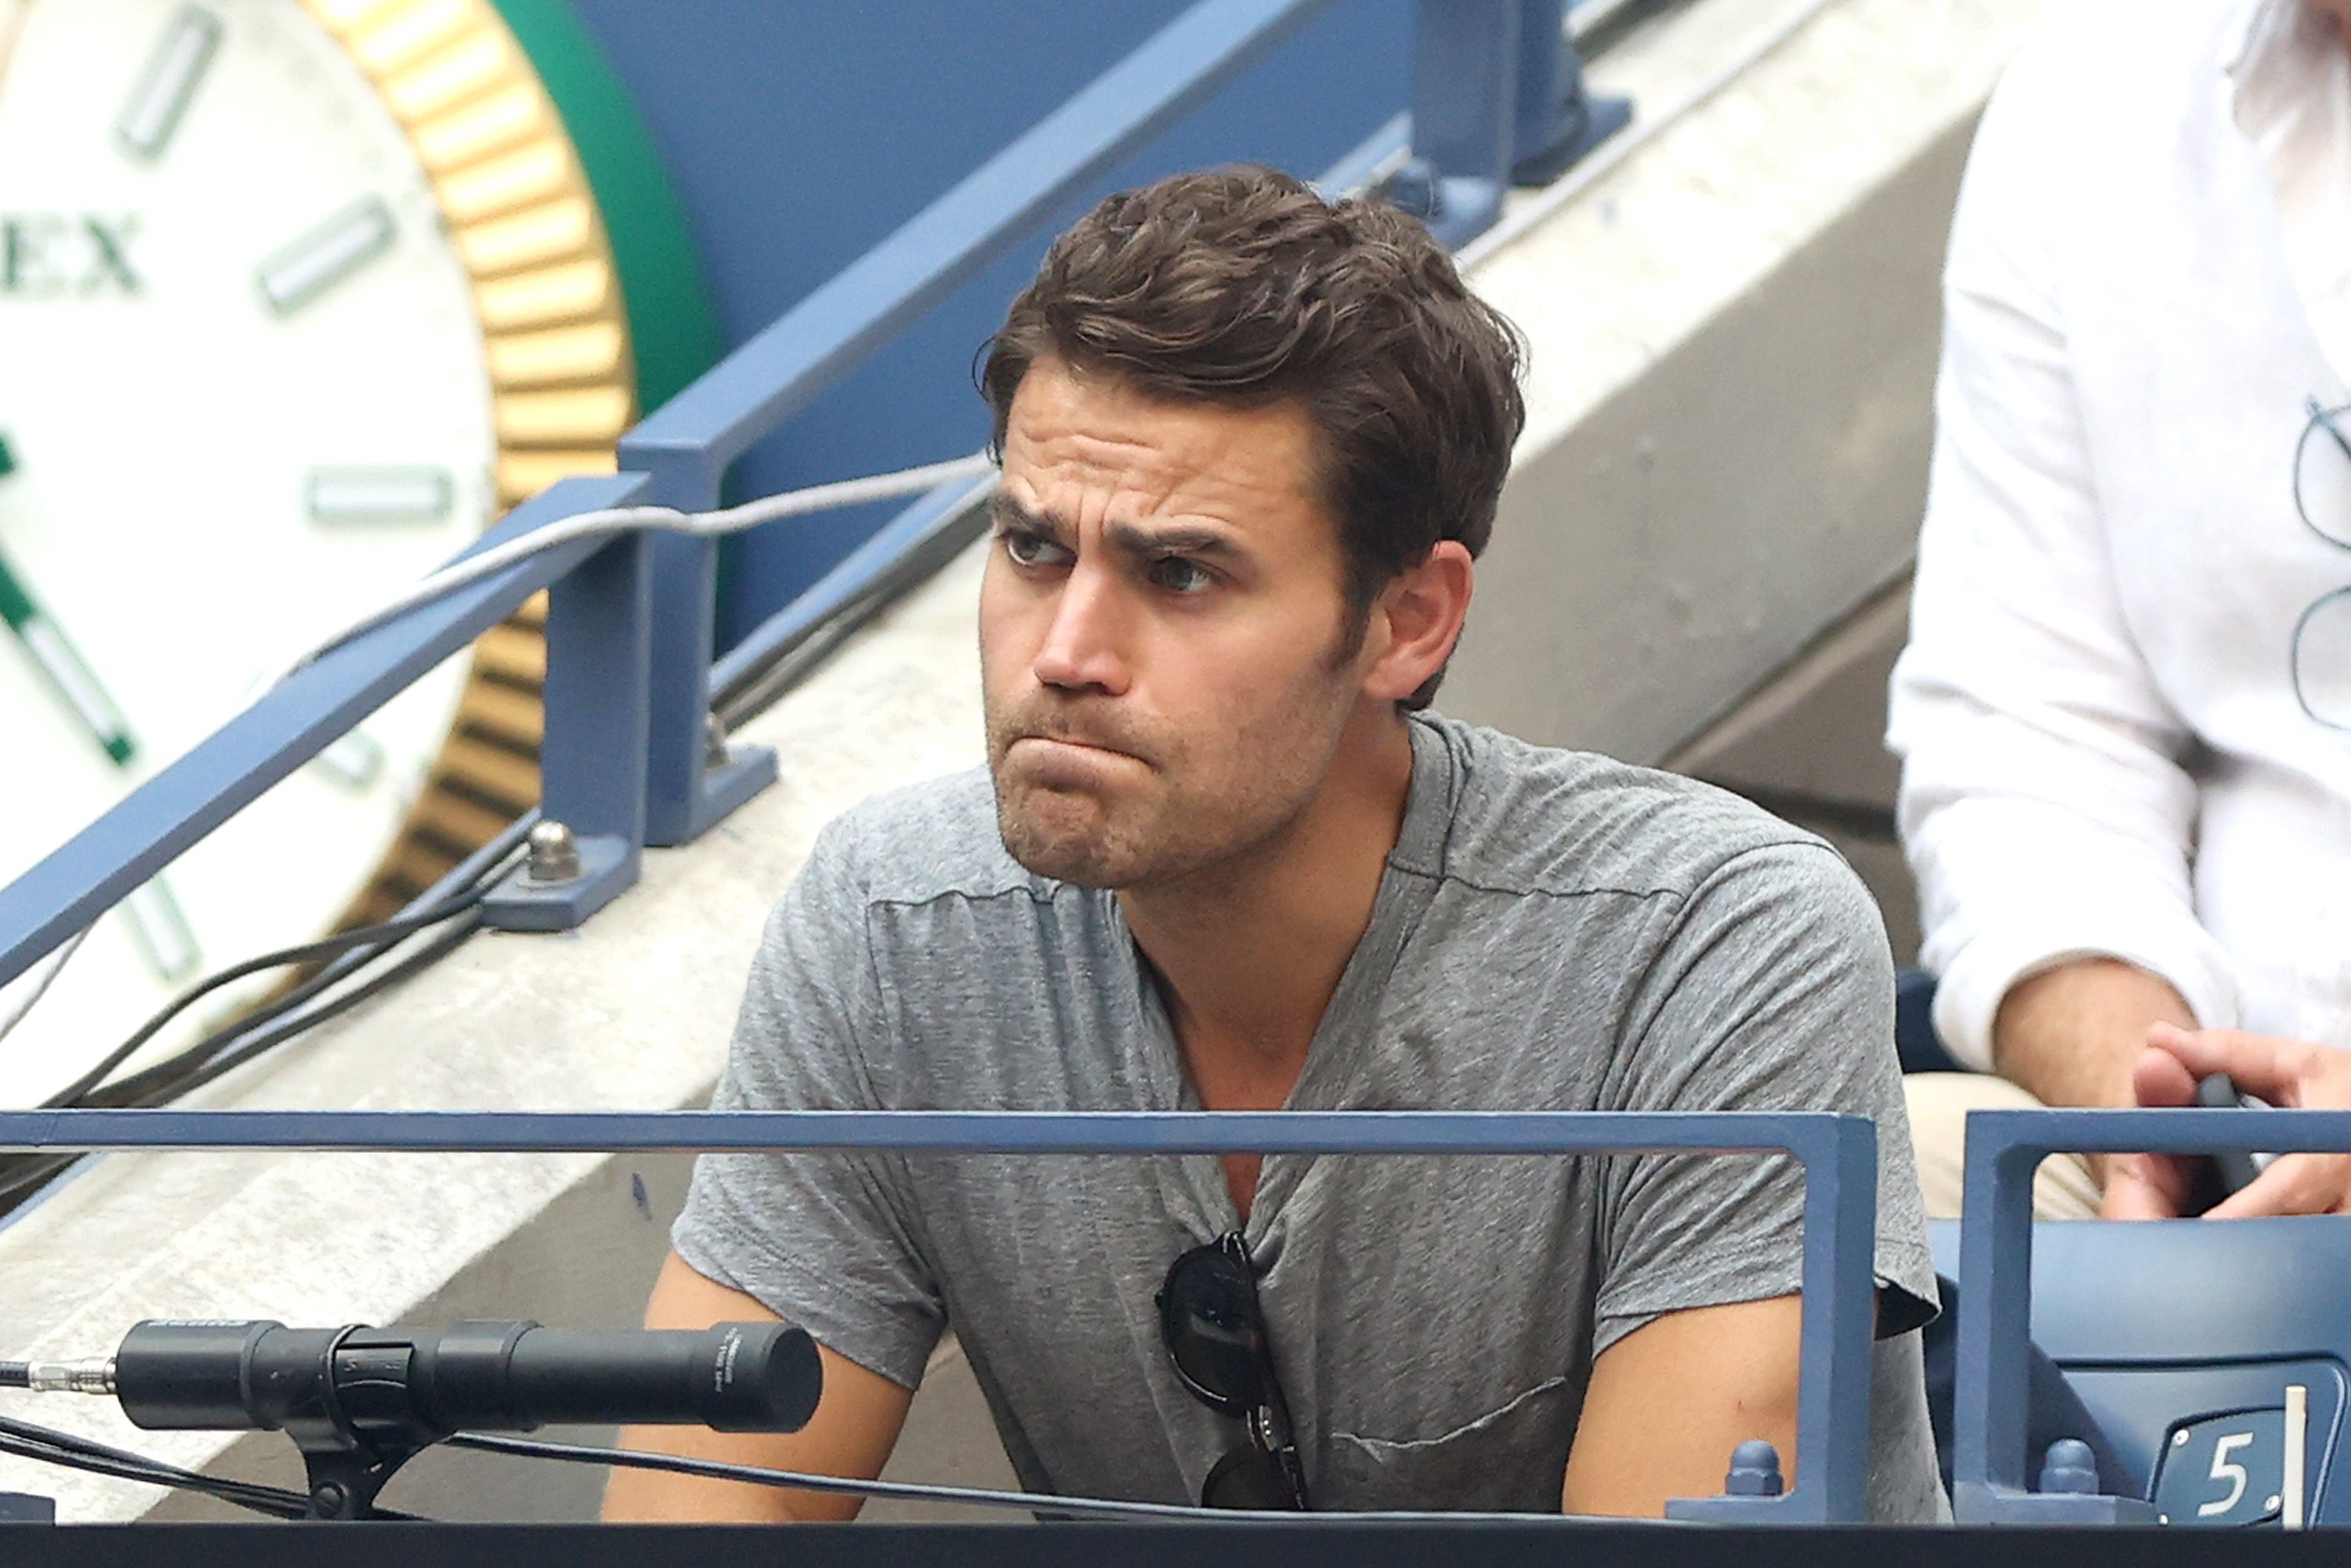 Paul Wesley during the 2021 US Open at the USTA Billie Jean King National Tennis Center on September 12, 2021, in the Flushing neighborhood of the Queens borough of New York City. | Source: Getty Images